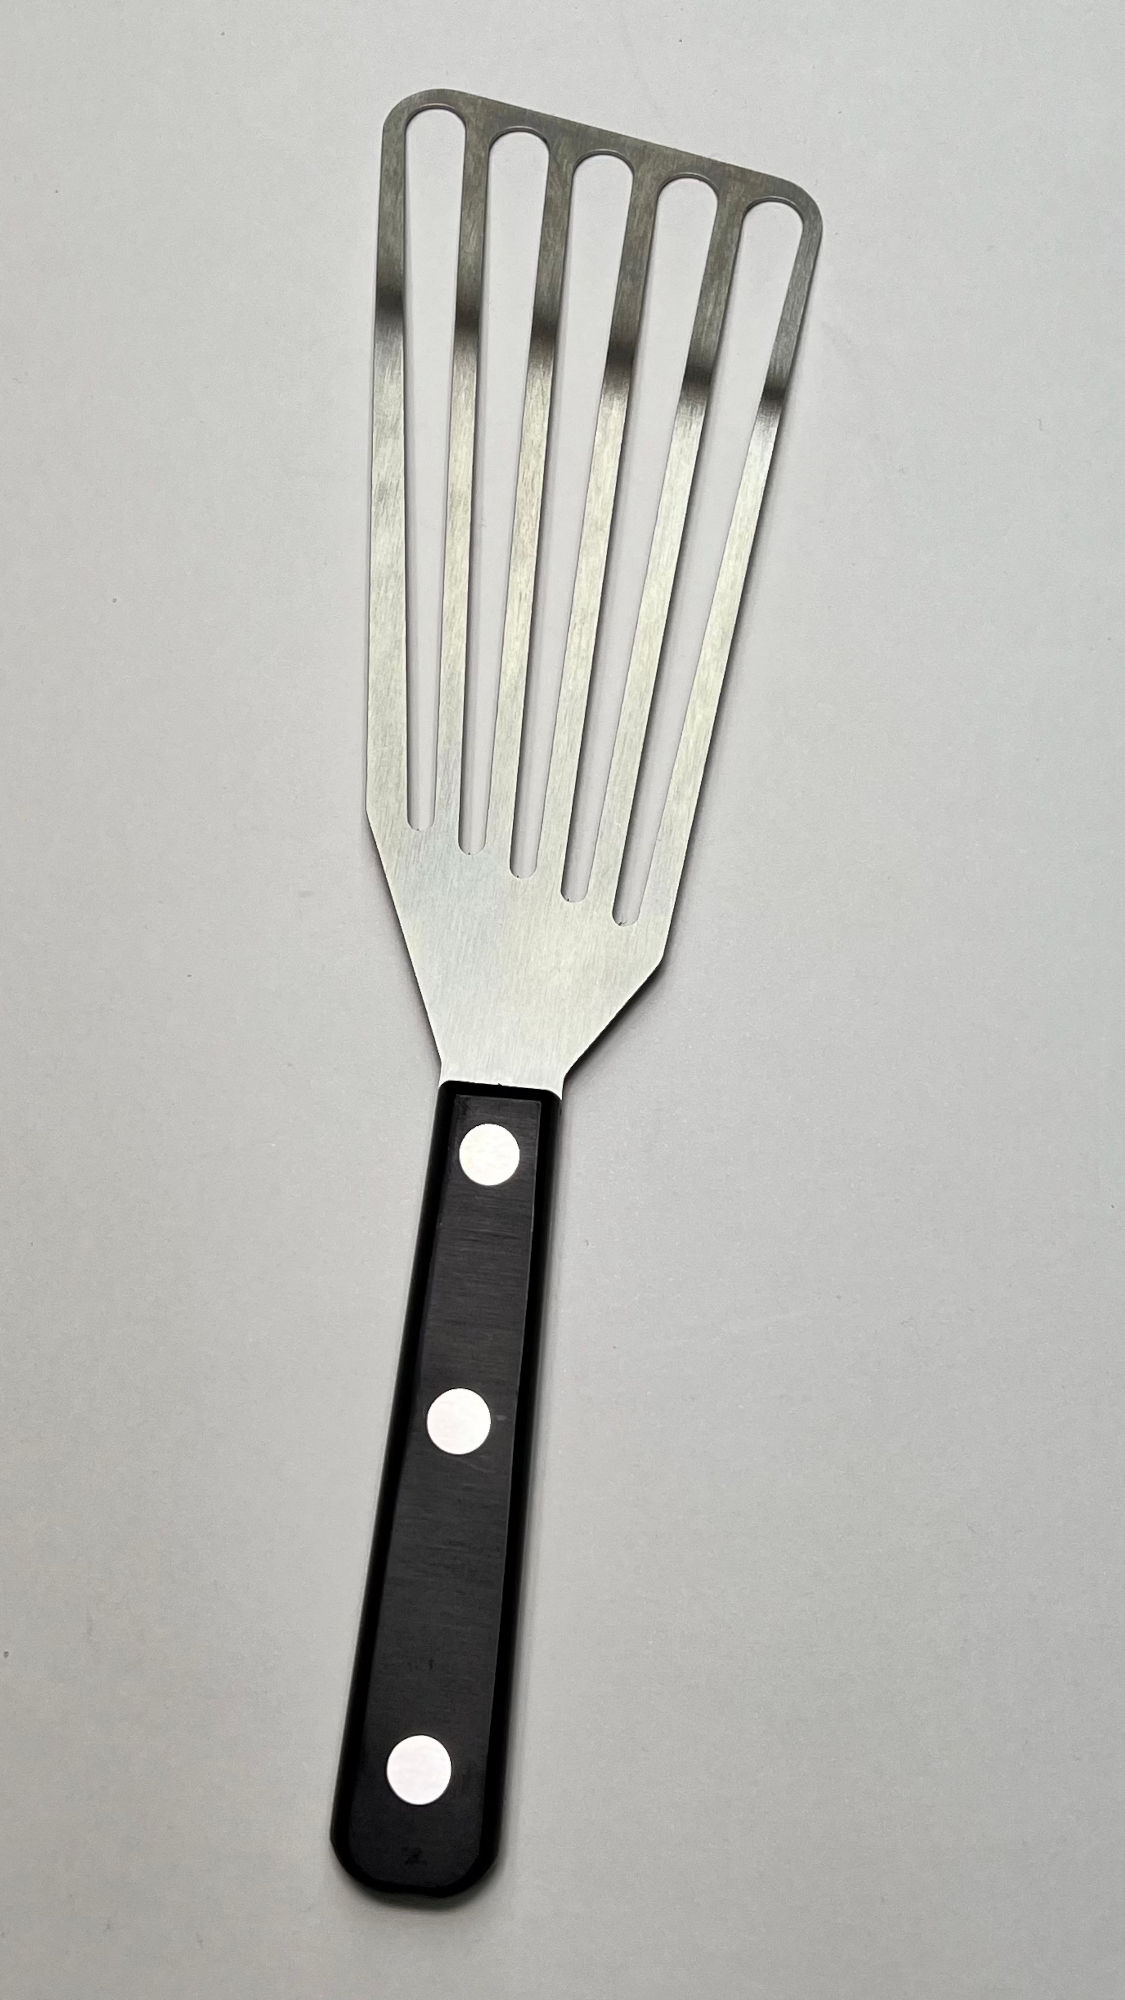 Lamson Chef's Slotted Turner